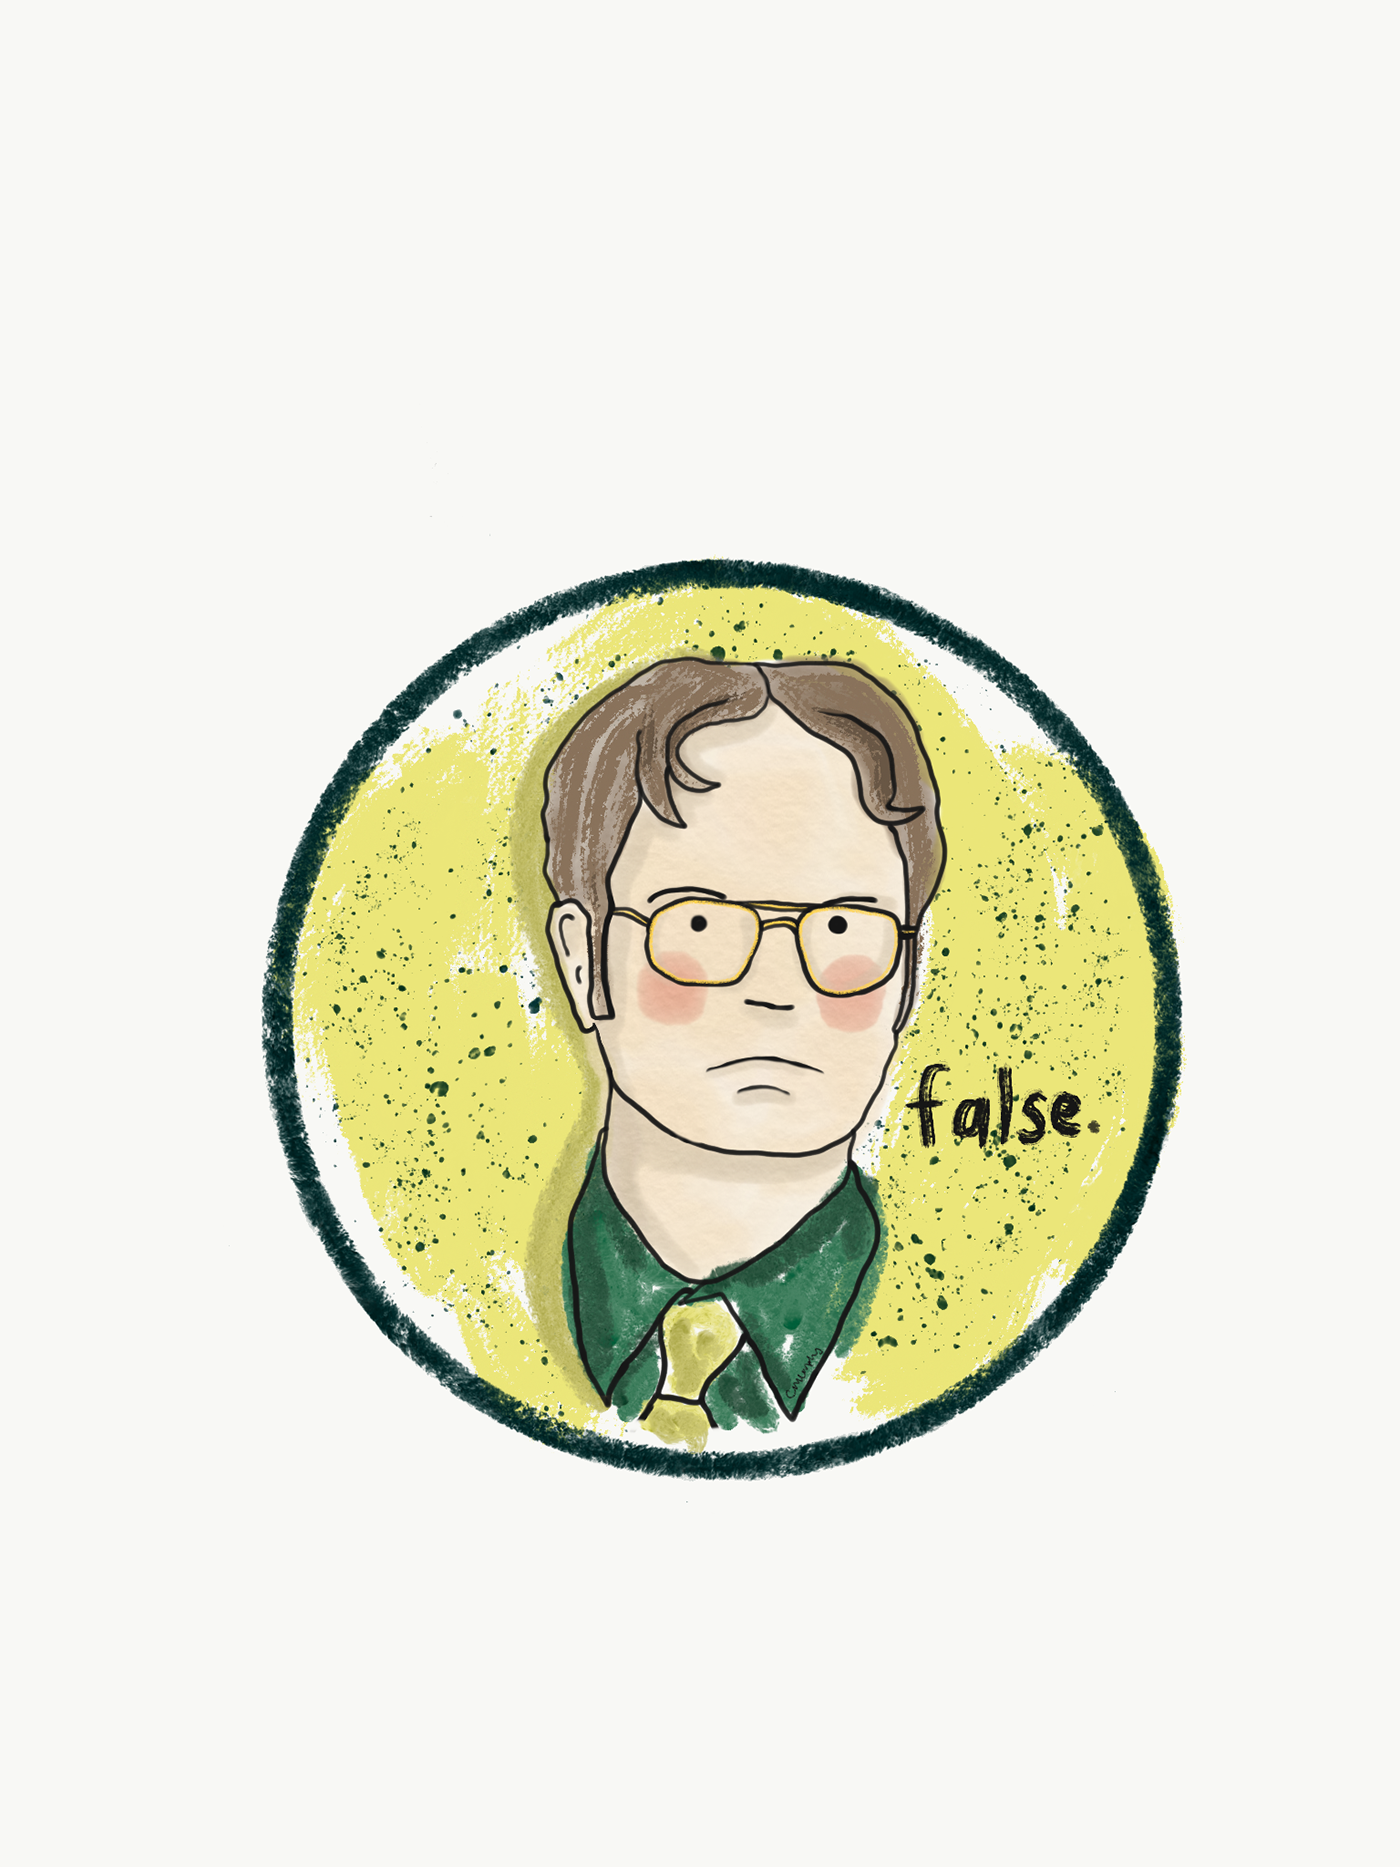 Dwight Schrute - The Office US.